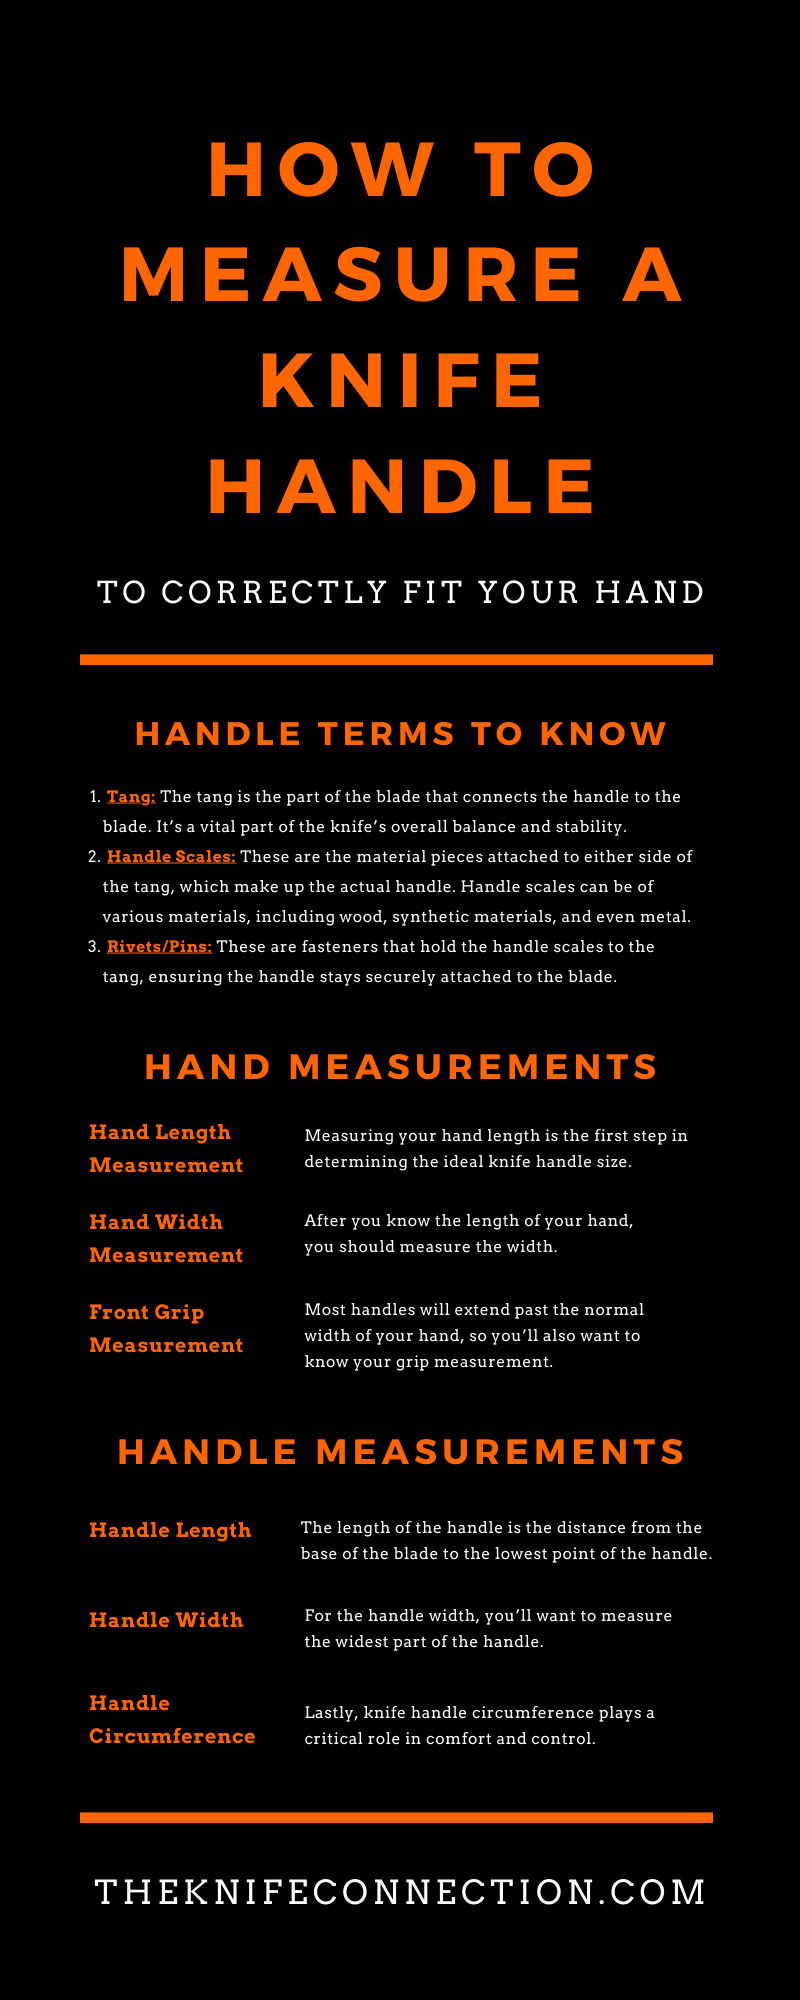 How To Measure a Knife Handle To Correctly Fit Your Hand